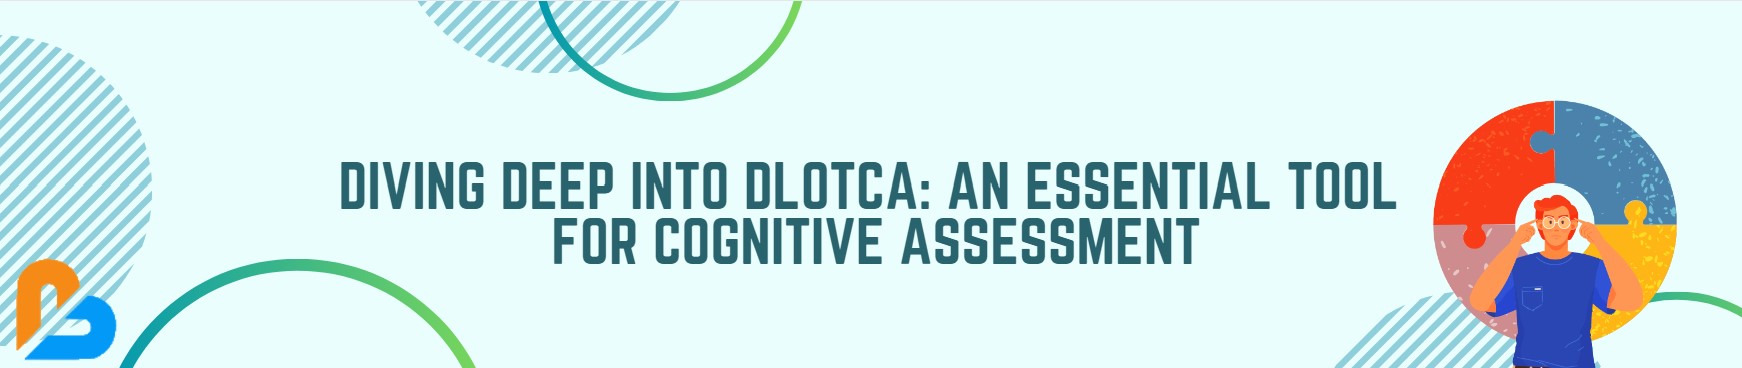 Diving Deep Into DLOTCA: An Essential Tool for Cognitive Assessment